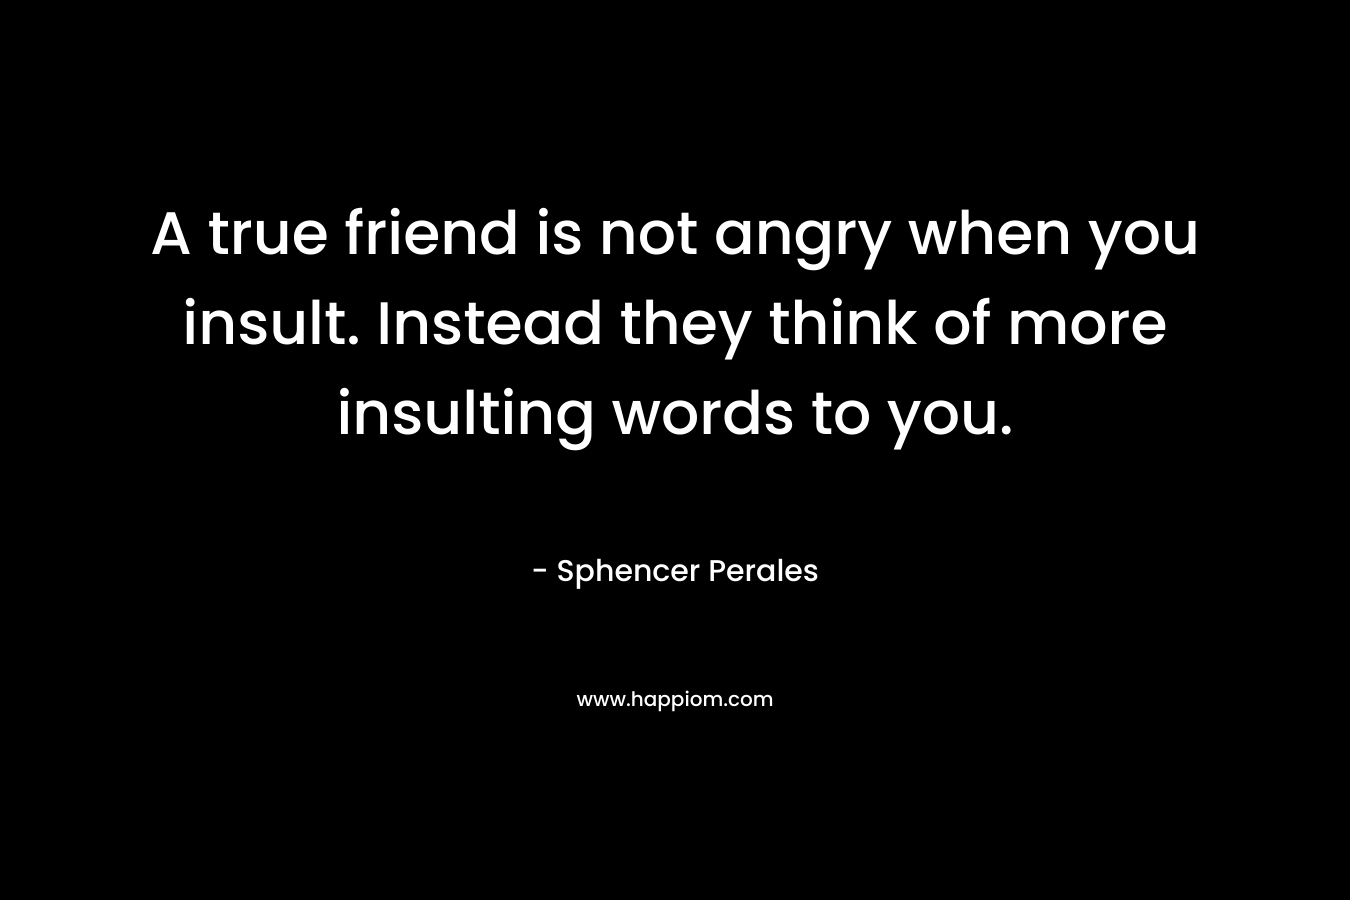 A true friend is not angry when you insult. Instead they think of more insulting words to you. – Sphencer Perales